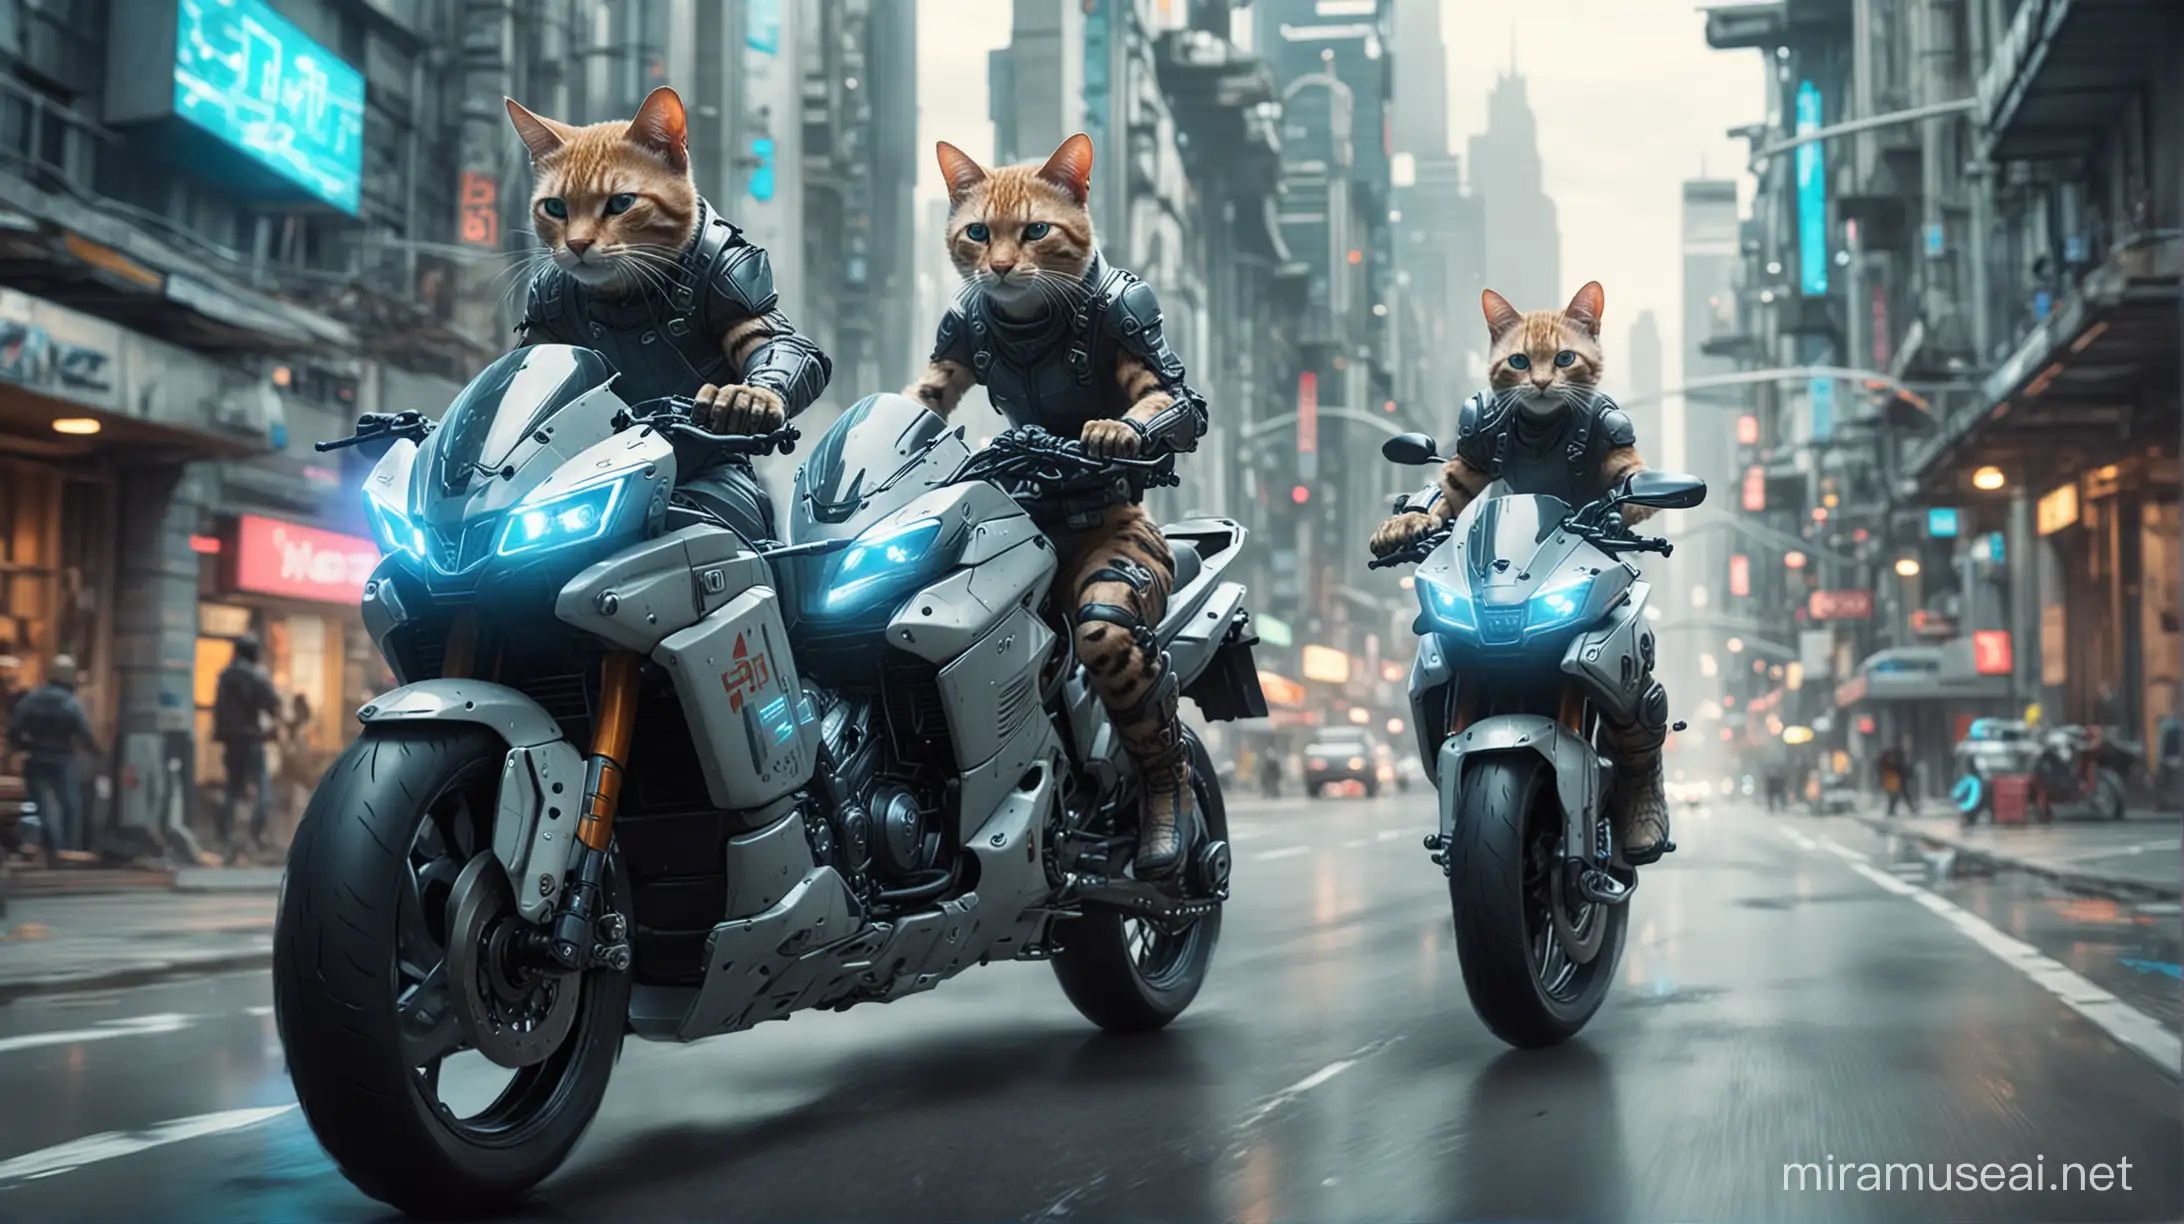 two cybercats riding motorcycles in a futuristic city with motion blur